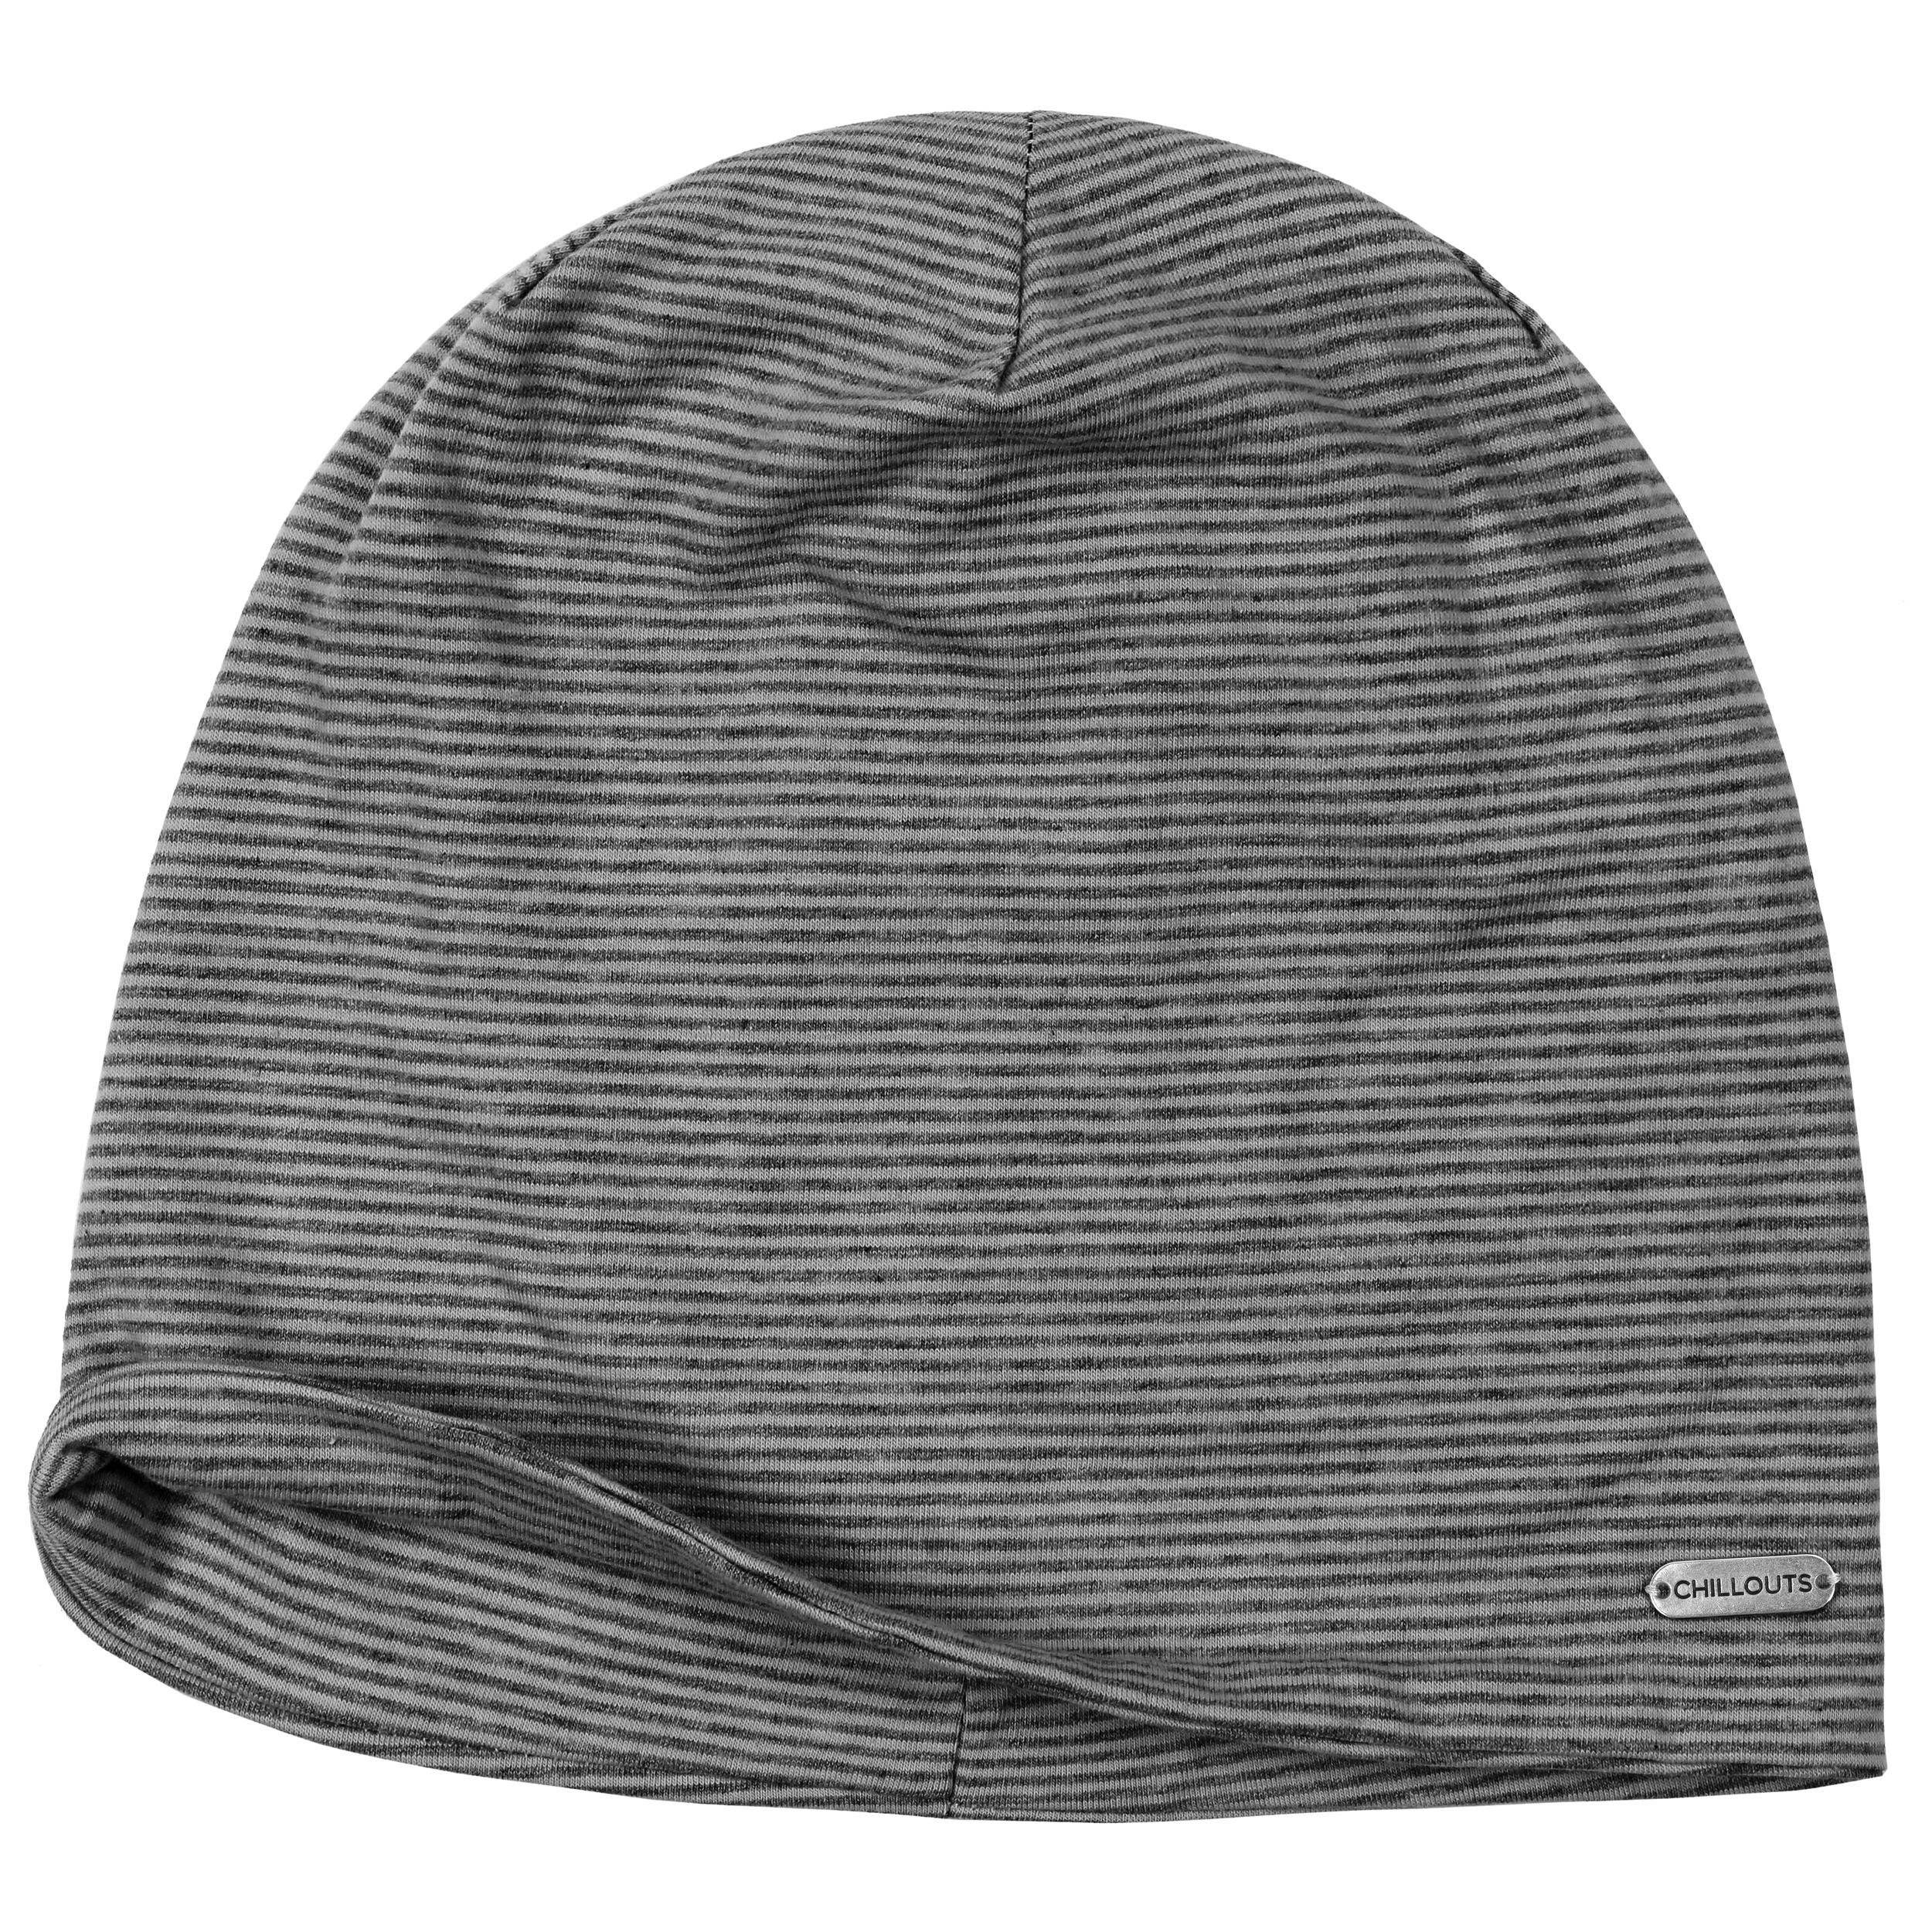 Pittsburgh Oversize Beanie by Chillouts - 24,95 €